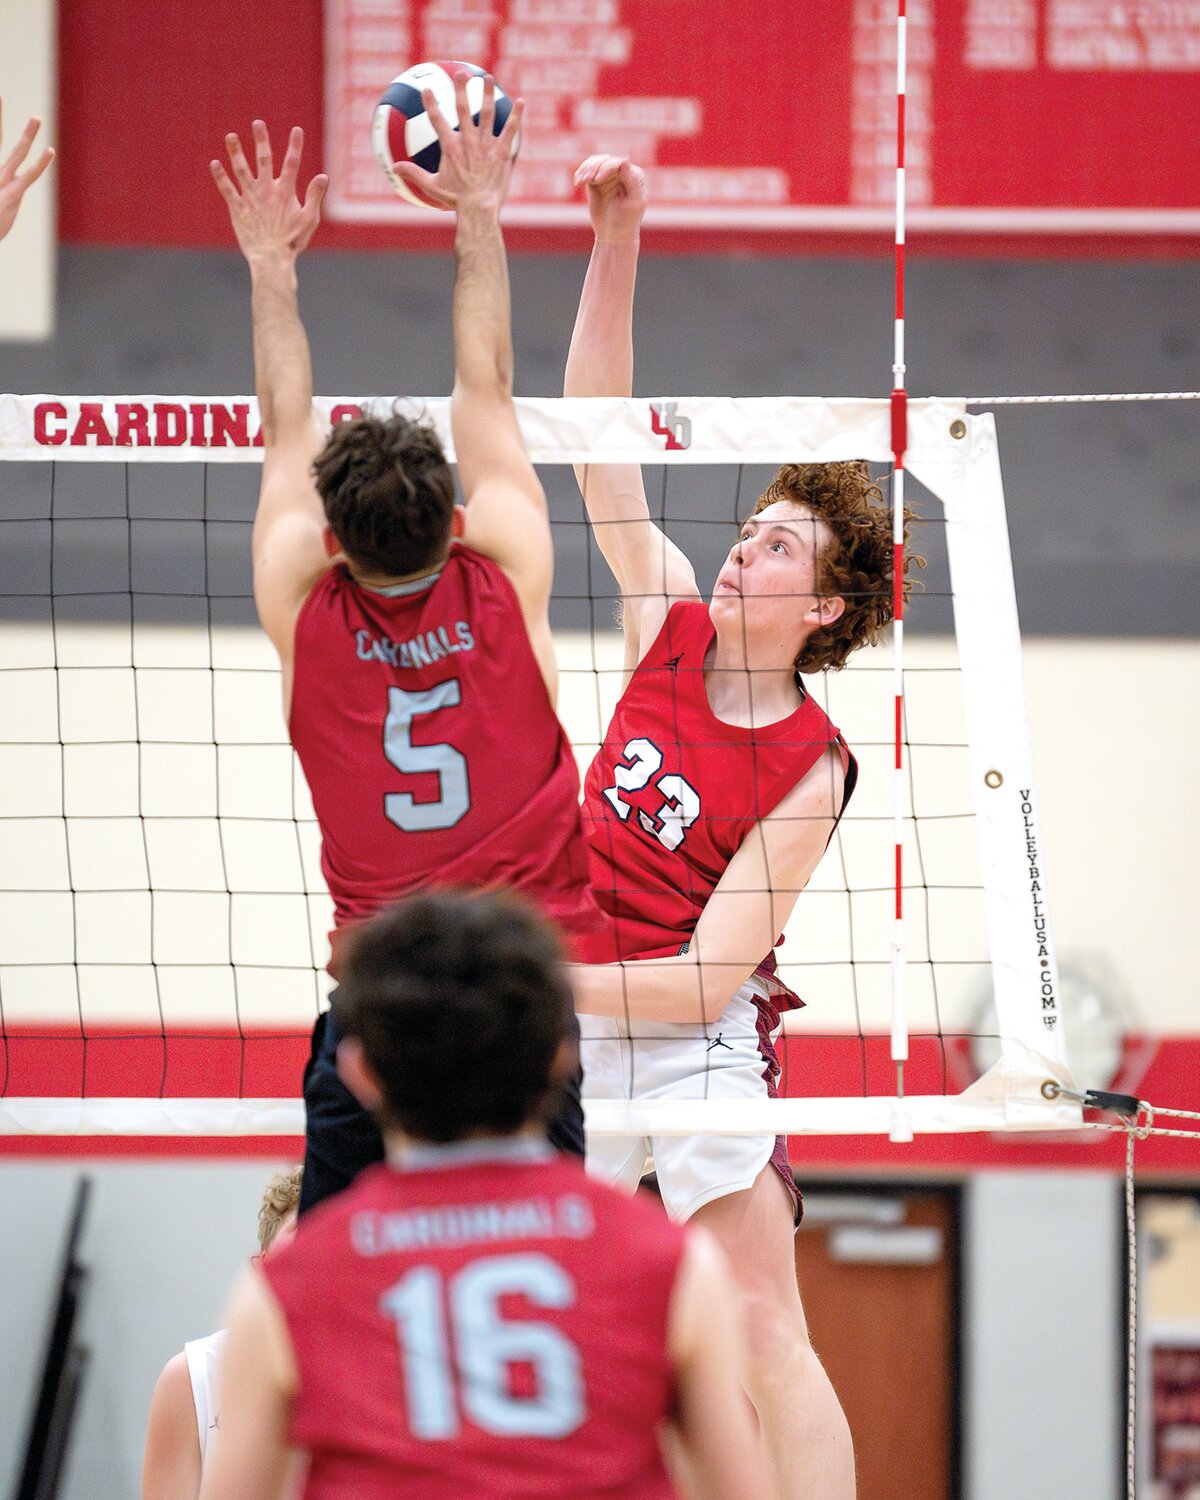 Central Buck East’s Evan Blank with the spike past the outstretched defense of Upper Dublin’s Scott Barenbaum.